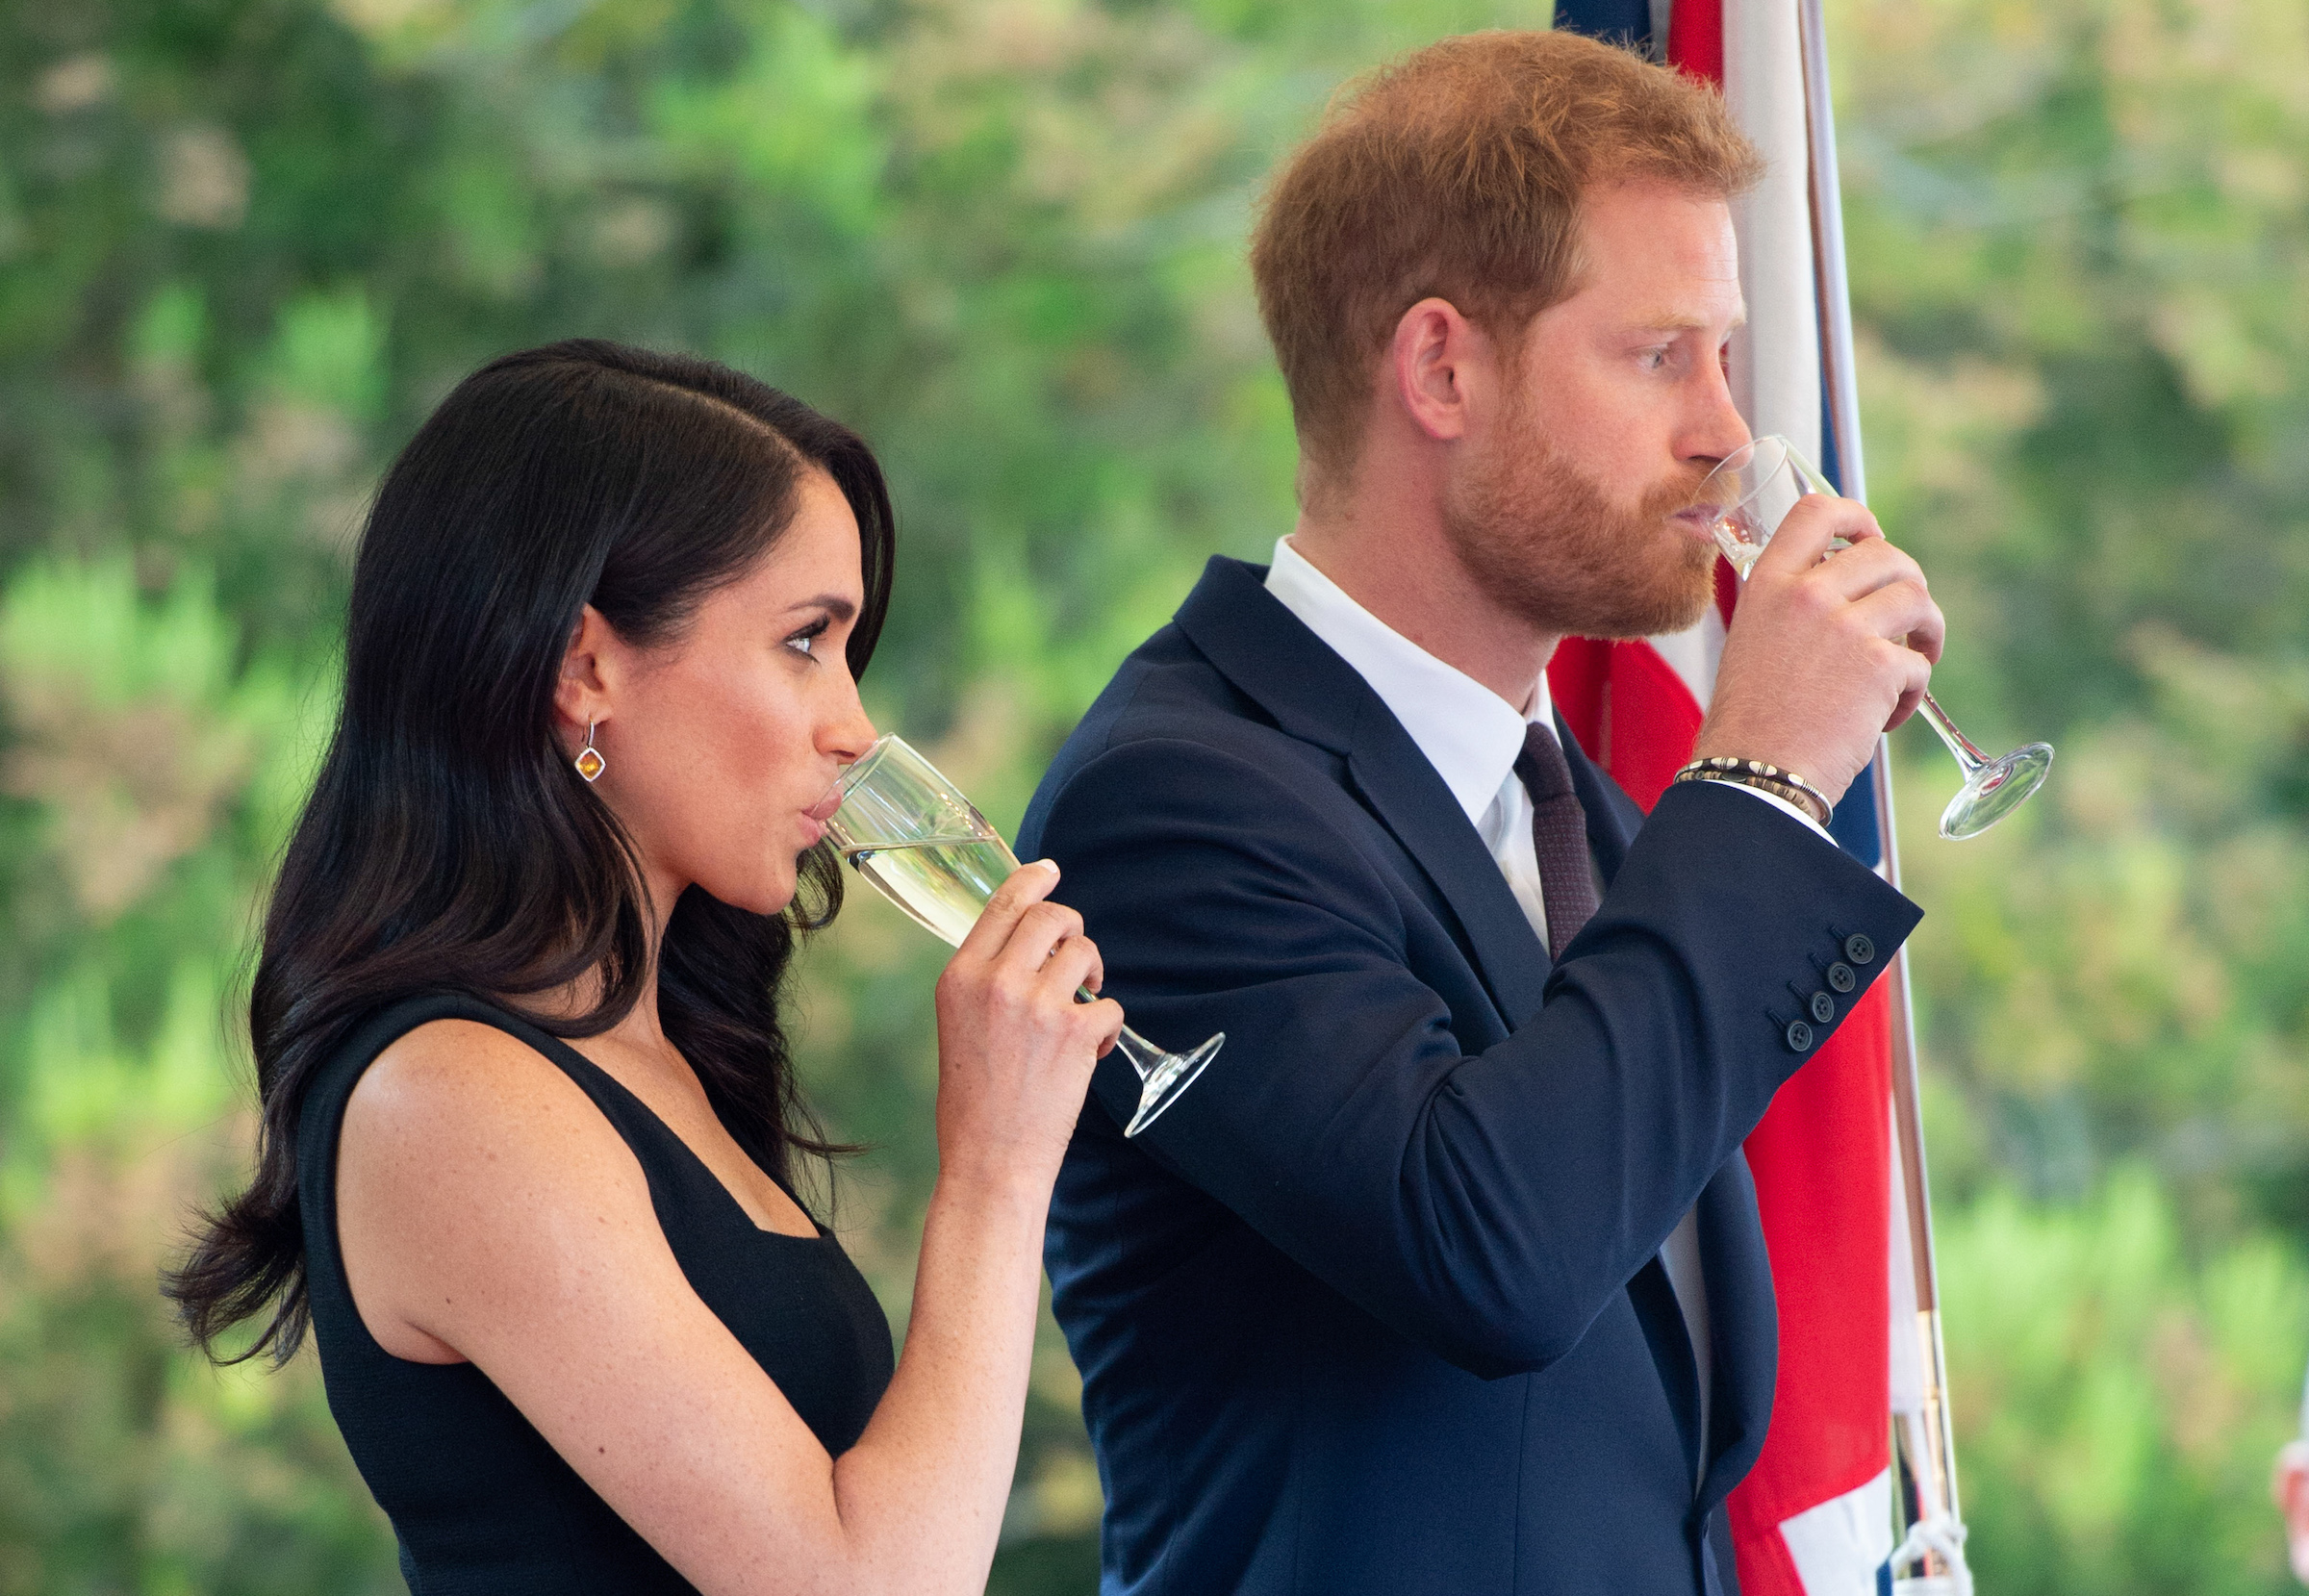 Meghan Markle and Prince Harry toast with champagne while in Ireland